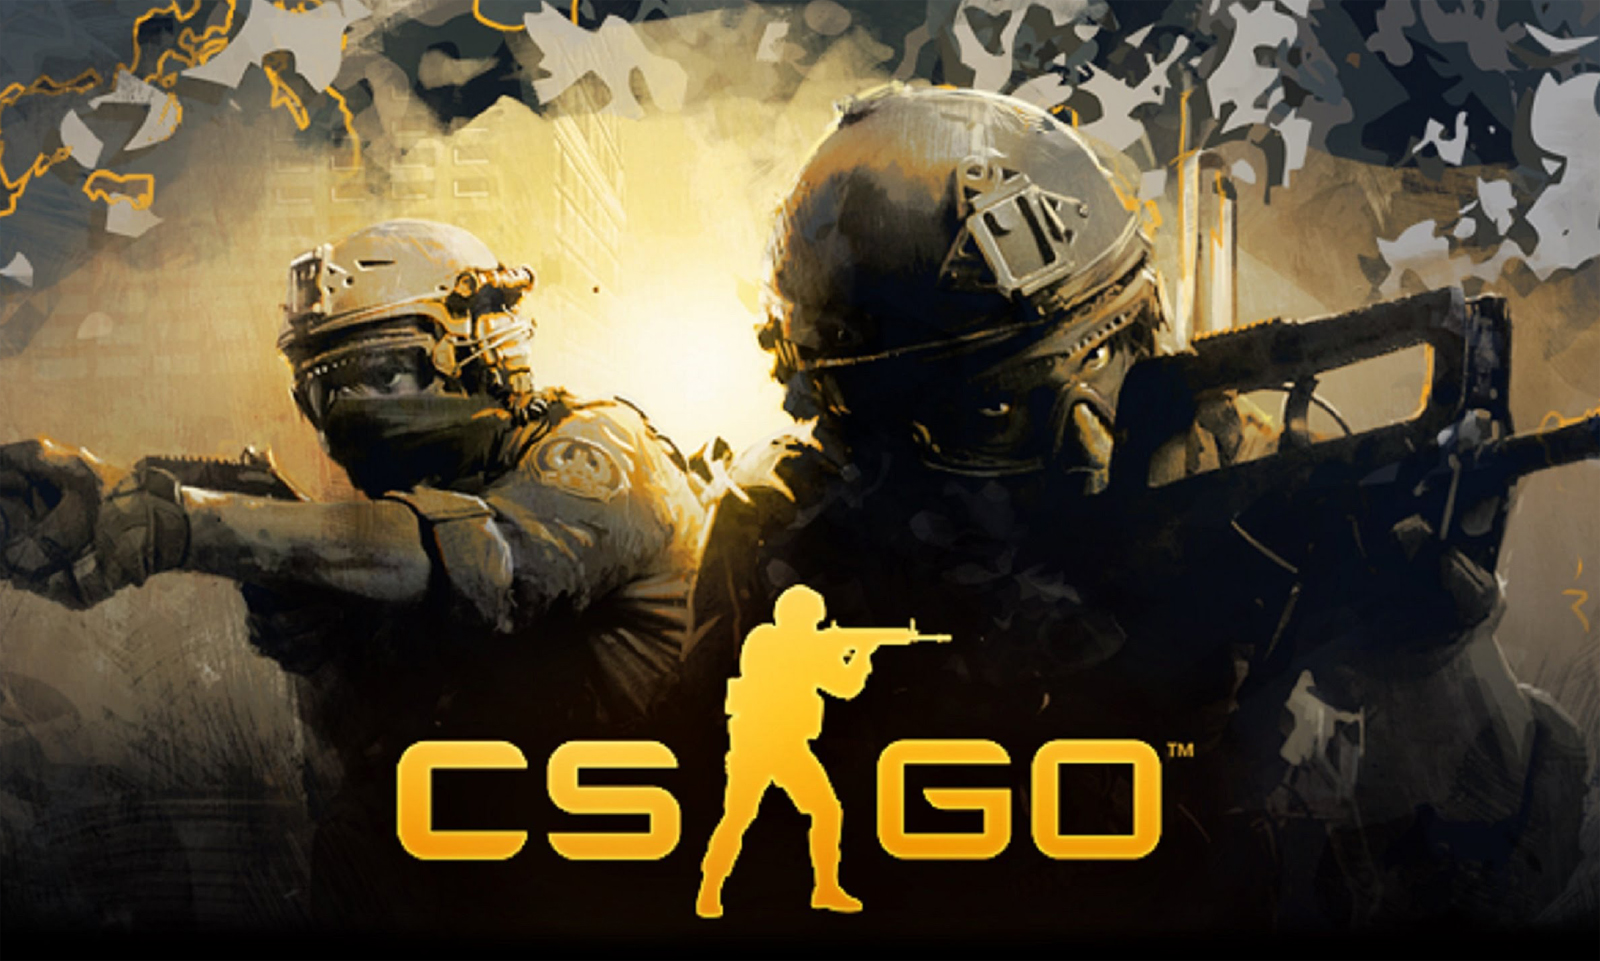 Counter strike global offensive game csgo. Counter-Strike: Global Offensive. КС го игра. Контр страйк Global Offensive. Counter Strike Global Offensive картинки.